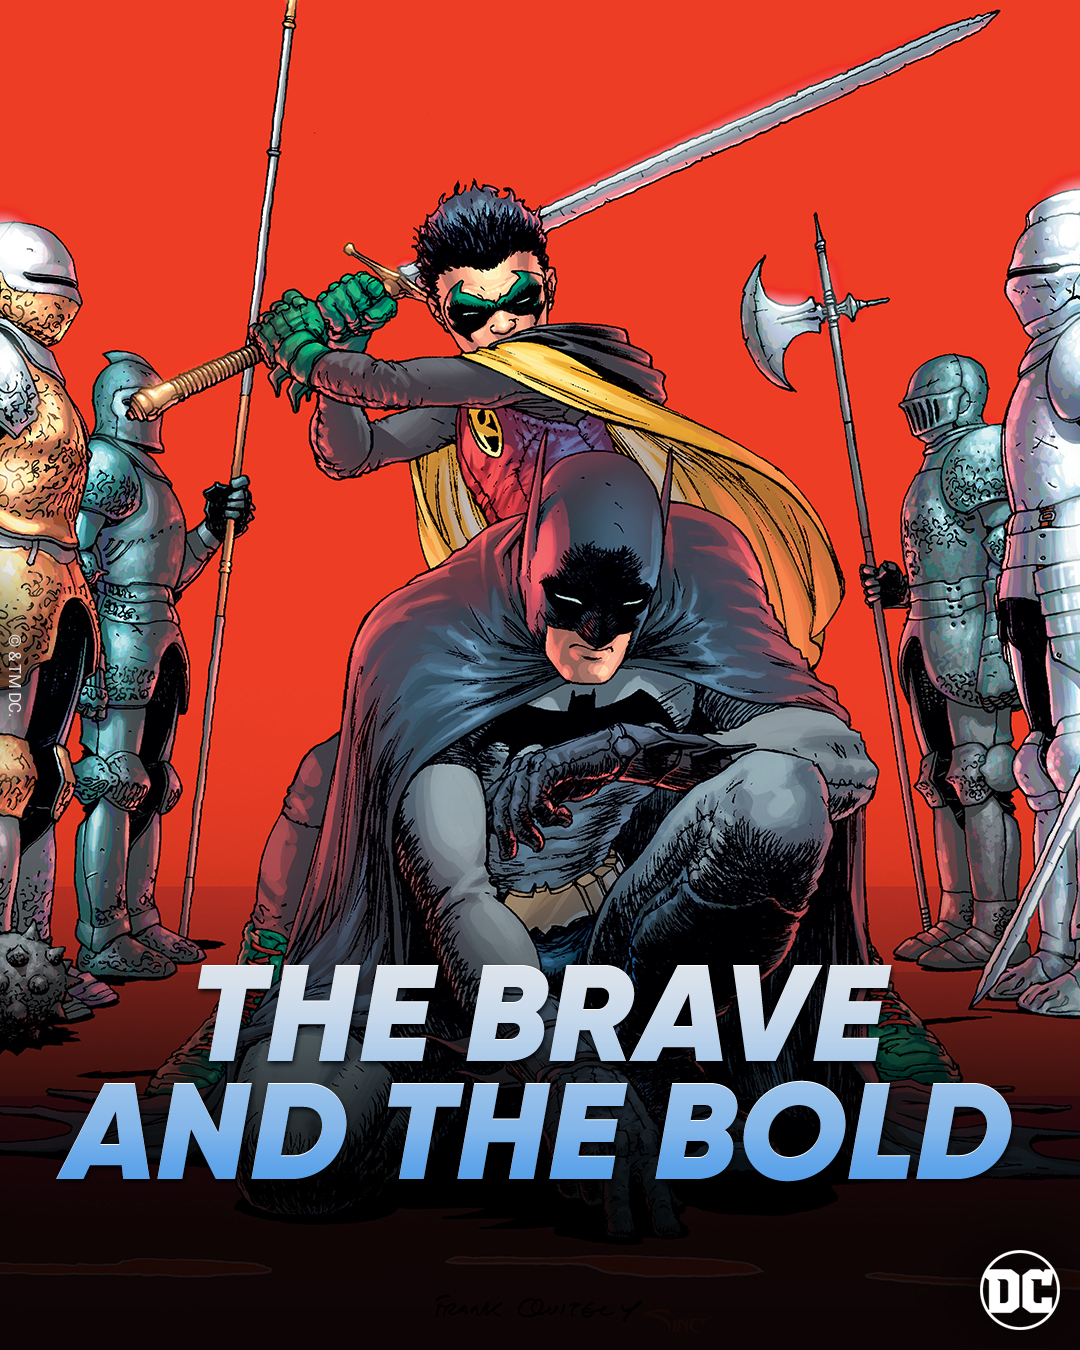  The Brave One : Movies & TV